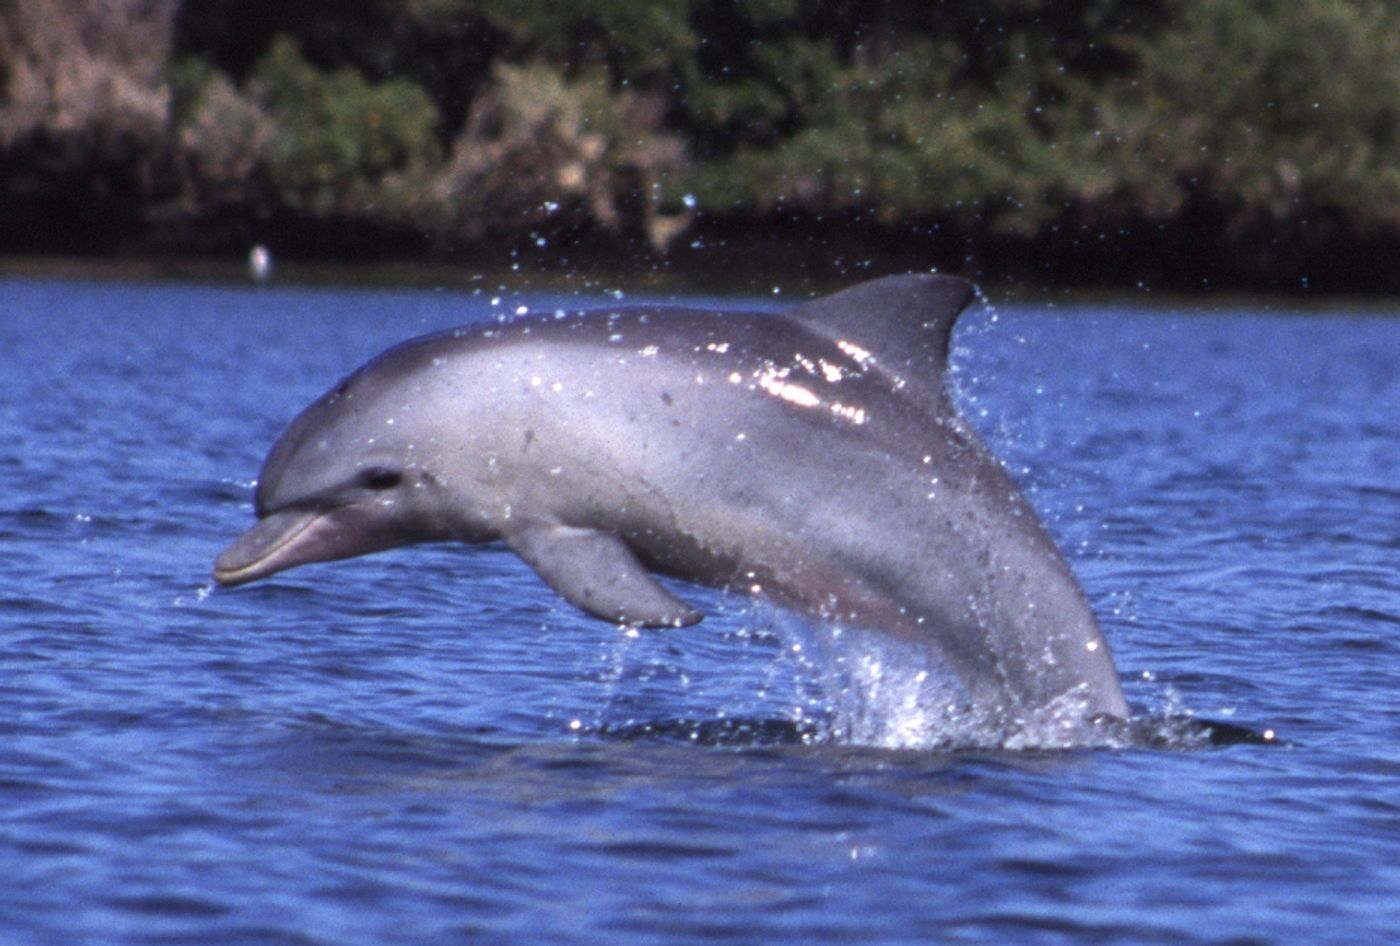 This bottlenose dolphin might suffer from Alzheimer's one day / Image credit: Wikimedia Commons/ Aude Steiner